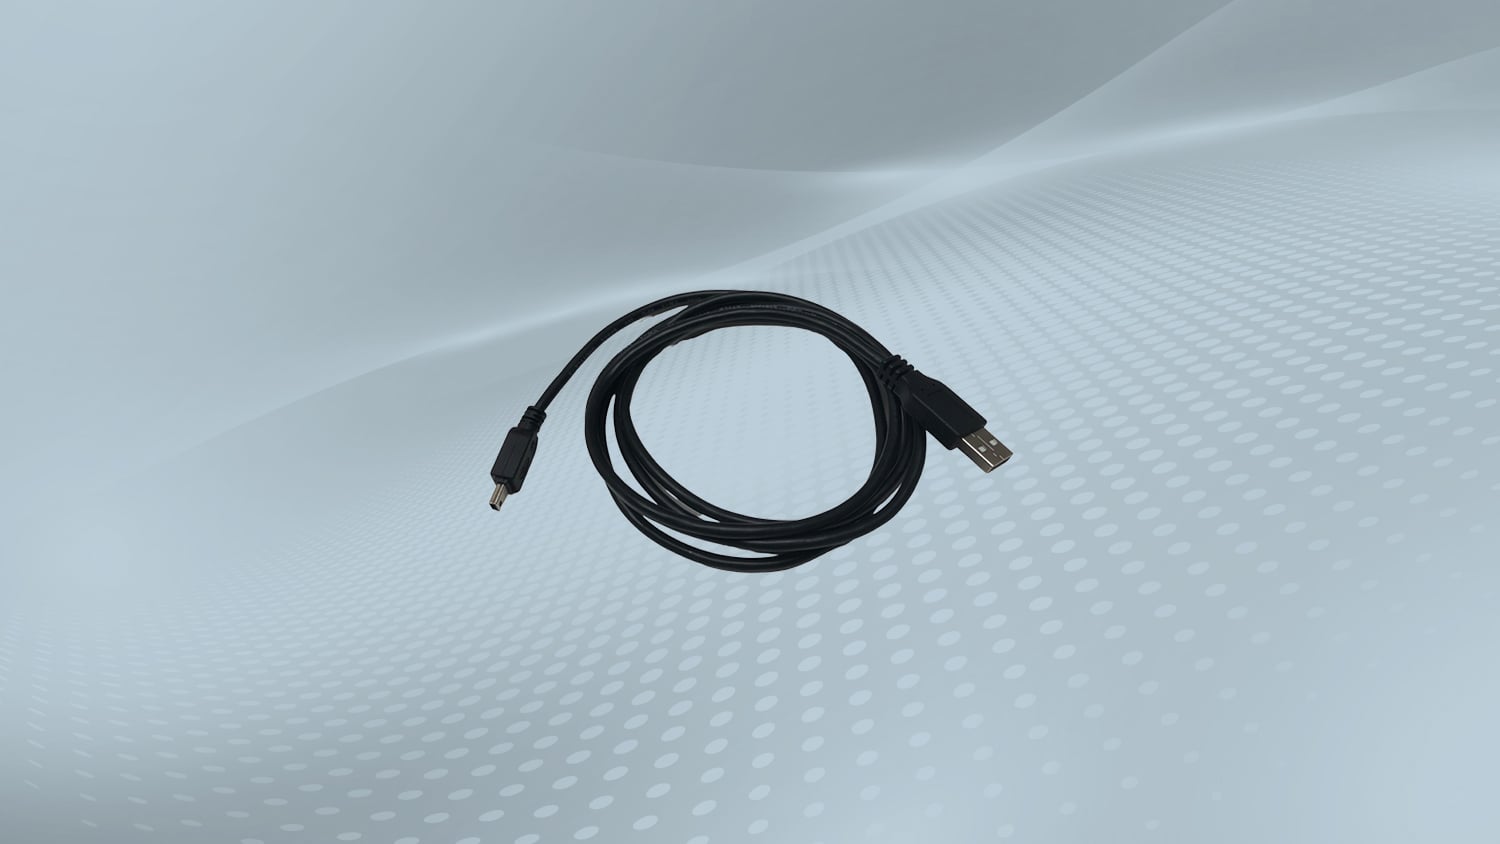 Standard Computer USB Cable (1.8 m, Connect Arrow to PC) Eos Arrow GPS GIS GNSS Accessories